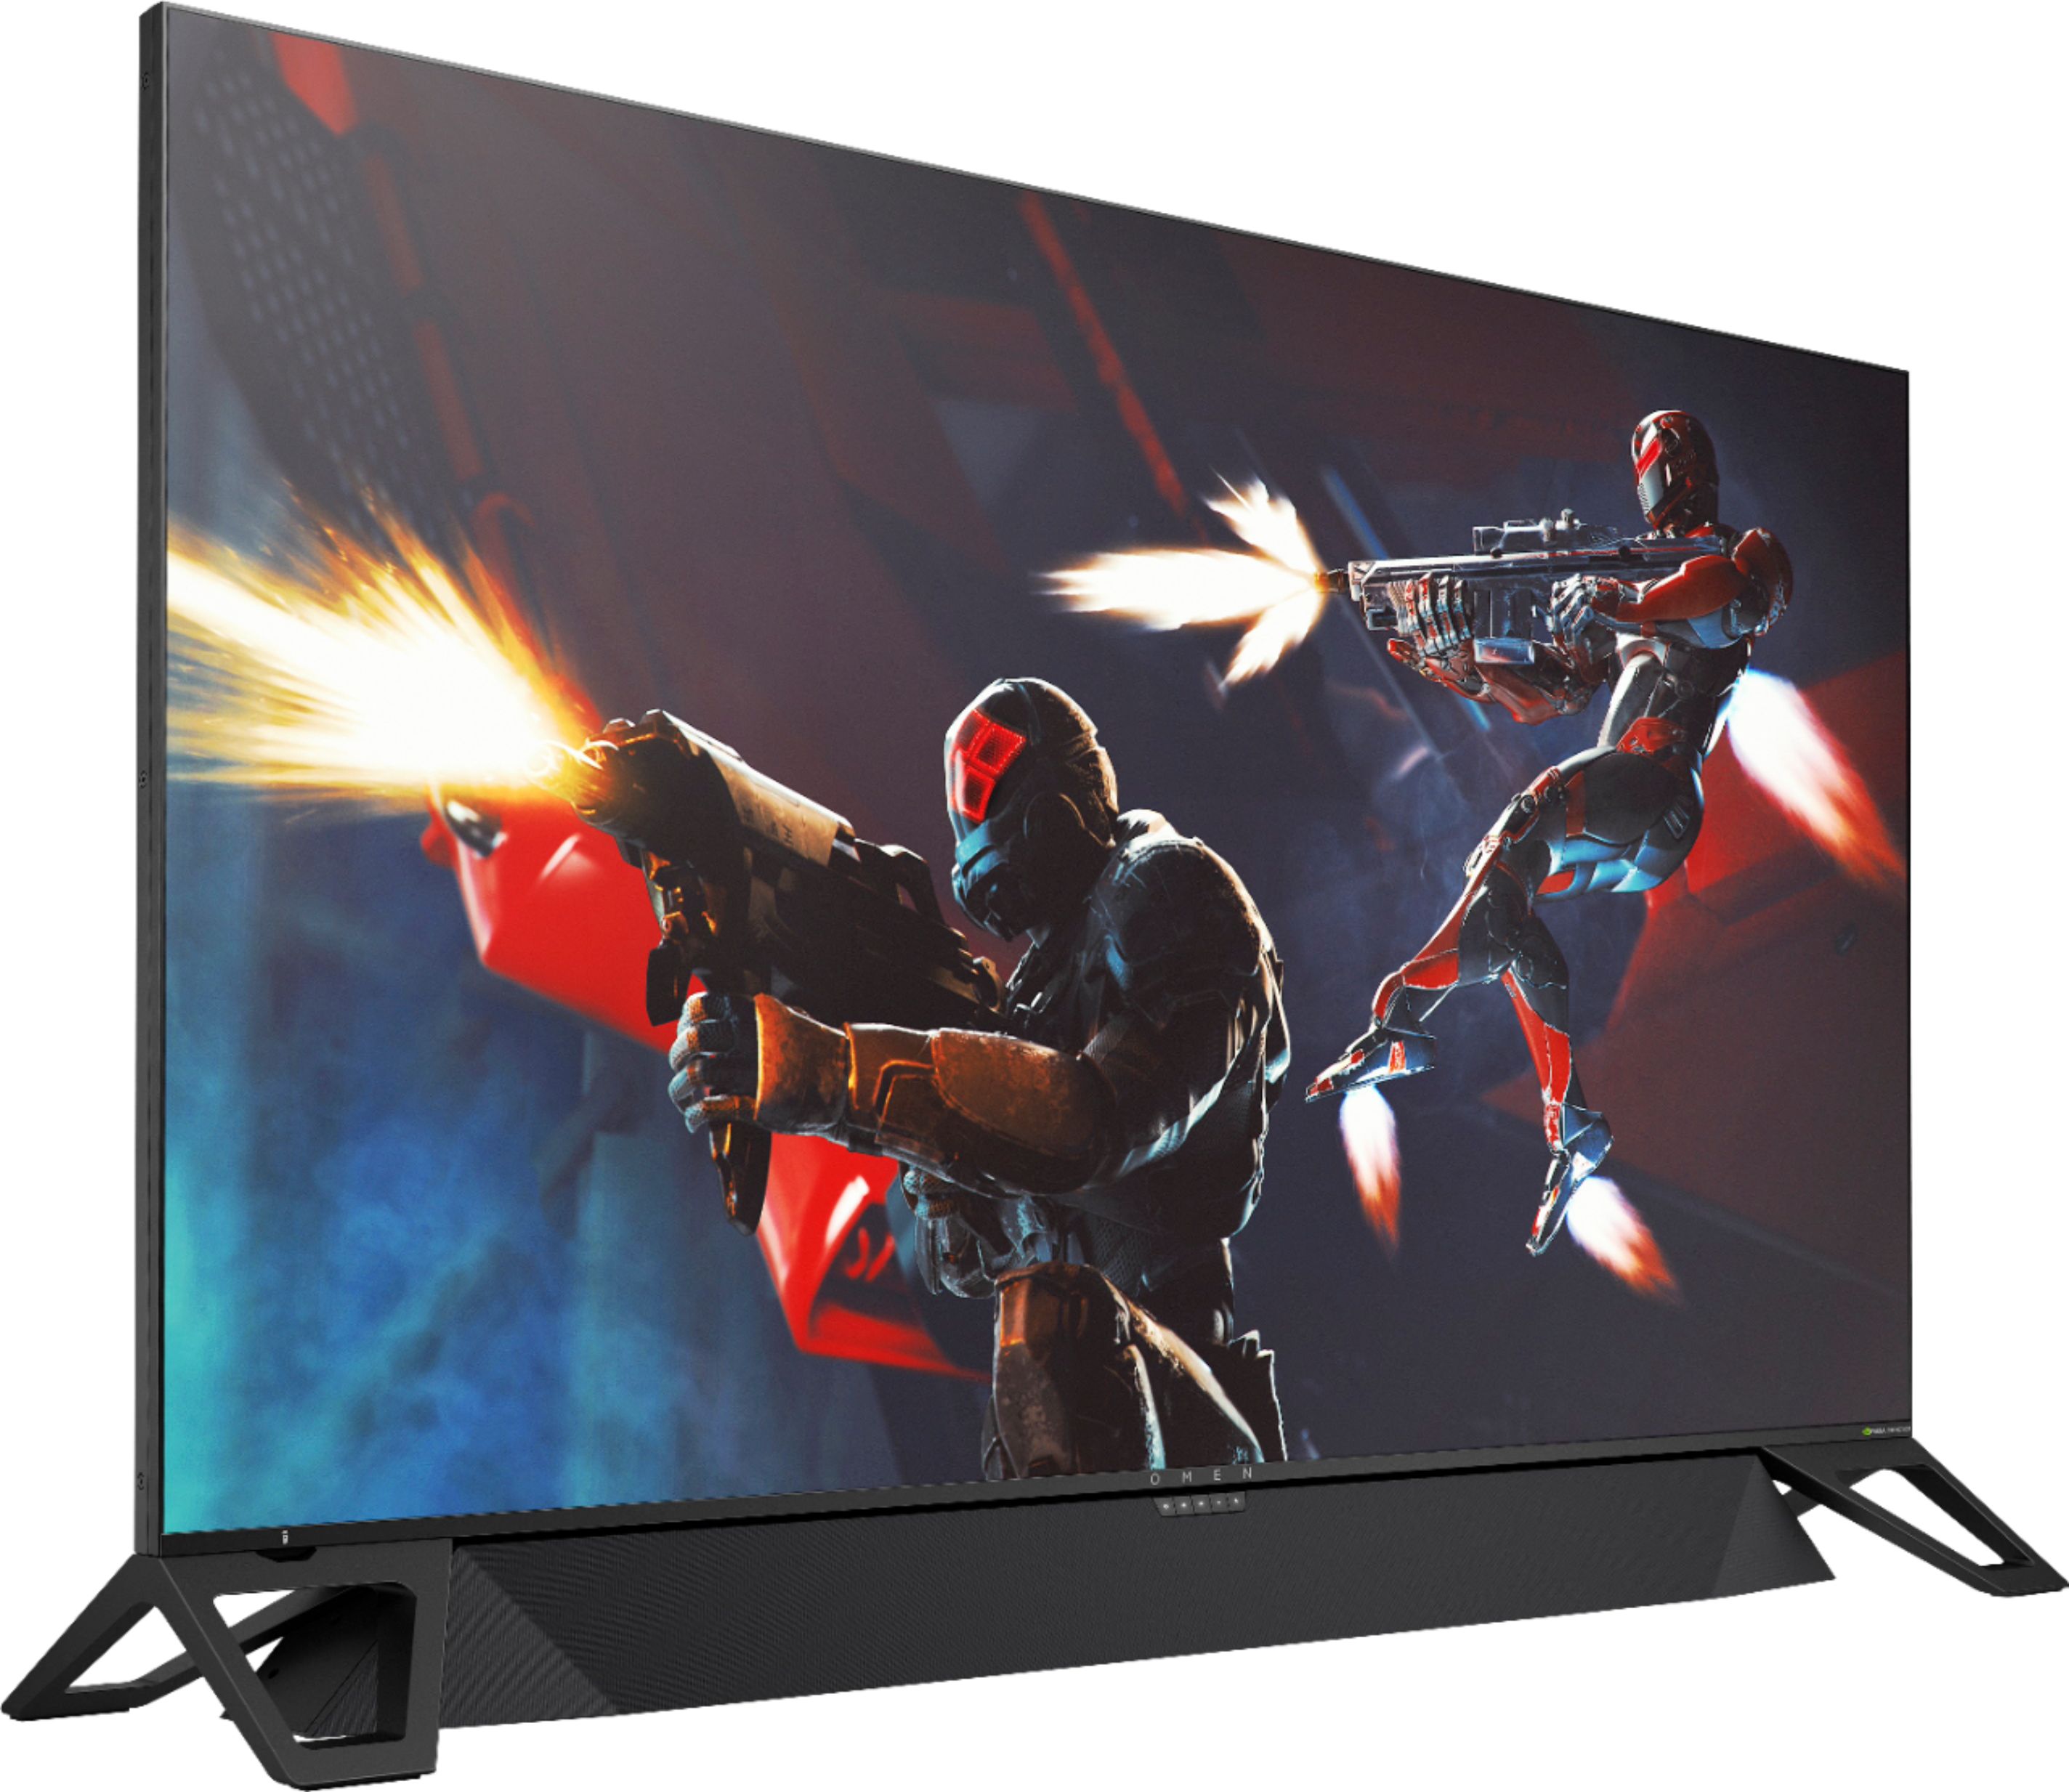 Angle View: HP OMEN - Emperium 65" LED 4K UHD G-SYNC Ultimate Monitor with HDR (DisplayPort, HDMI, USB) - Black/Green